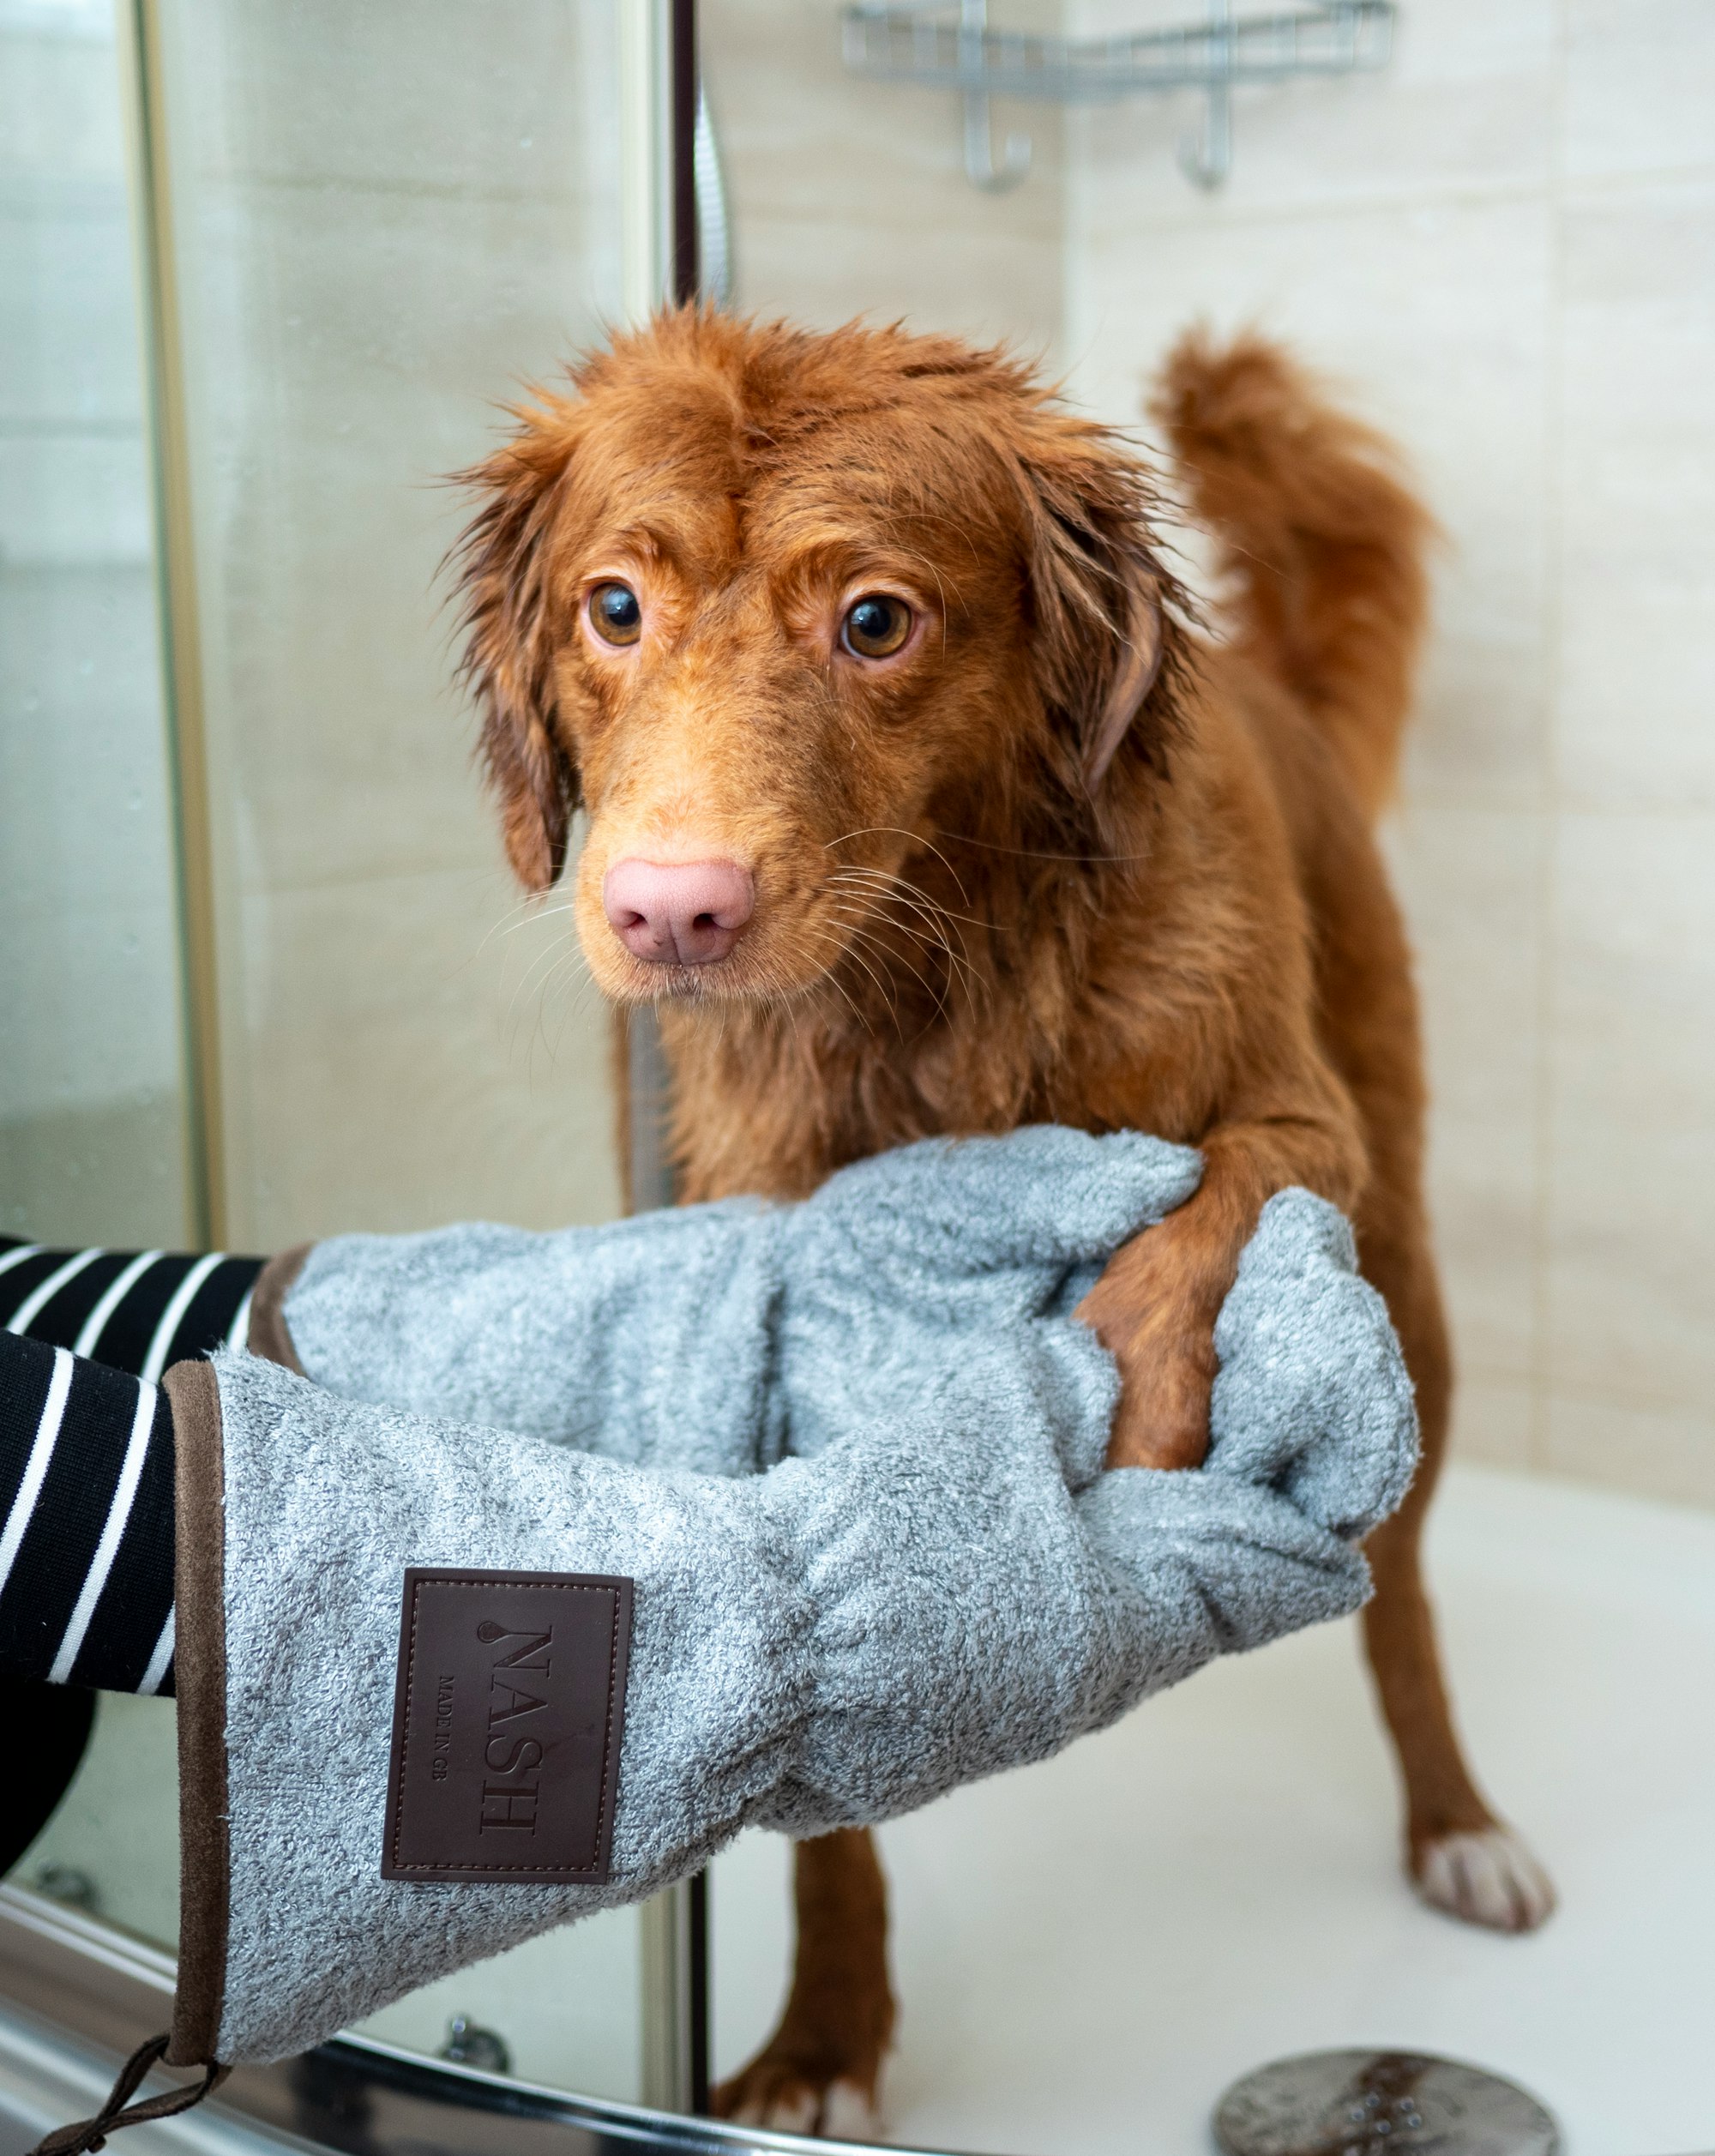 How To Groom a Dog: The Basics All Owners Should Know